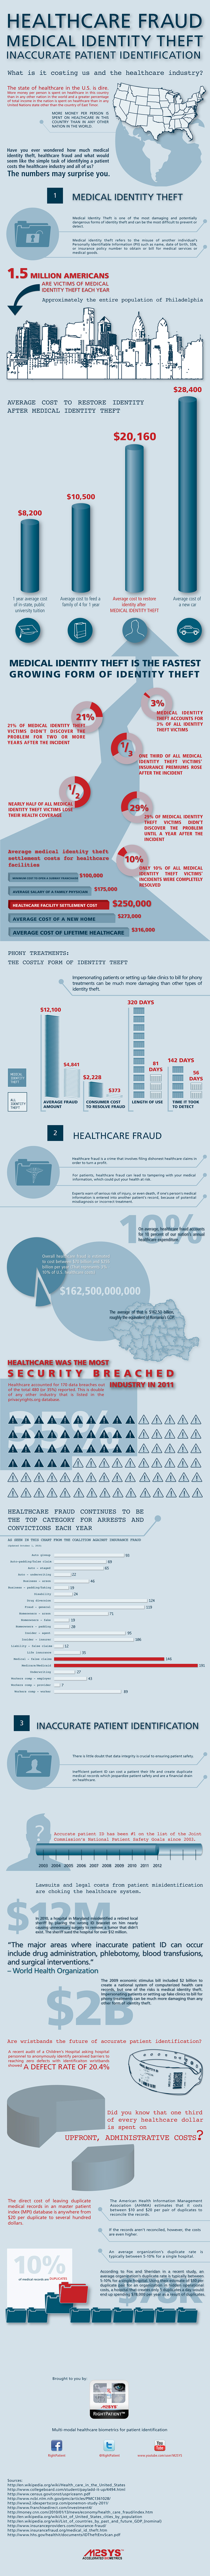 Infographics On Medical Identity Theft Healthcare Fraud